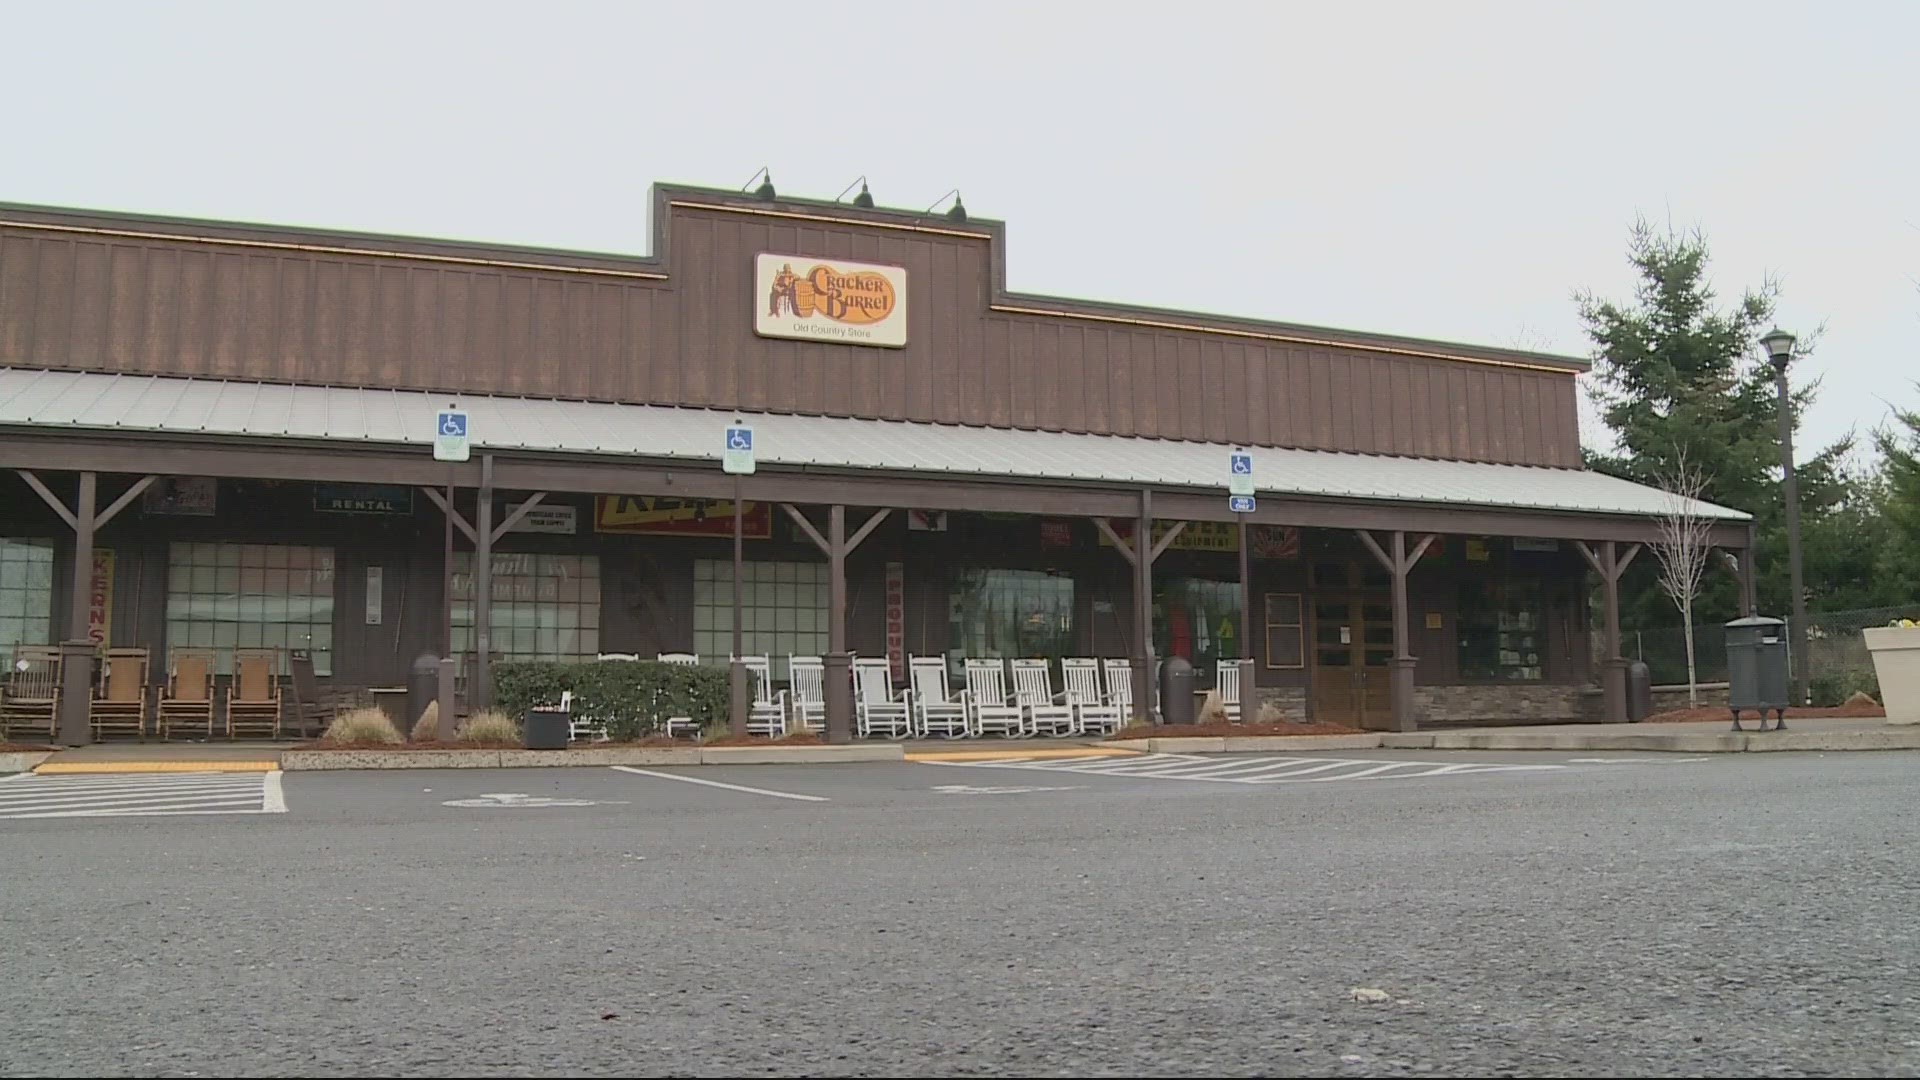 The only Cracker Barrel still open in Oregon is in Medford. Cracker Barrel cited the pandemic's impact on the business as its reason for the closures.